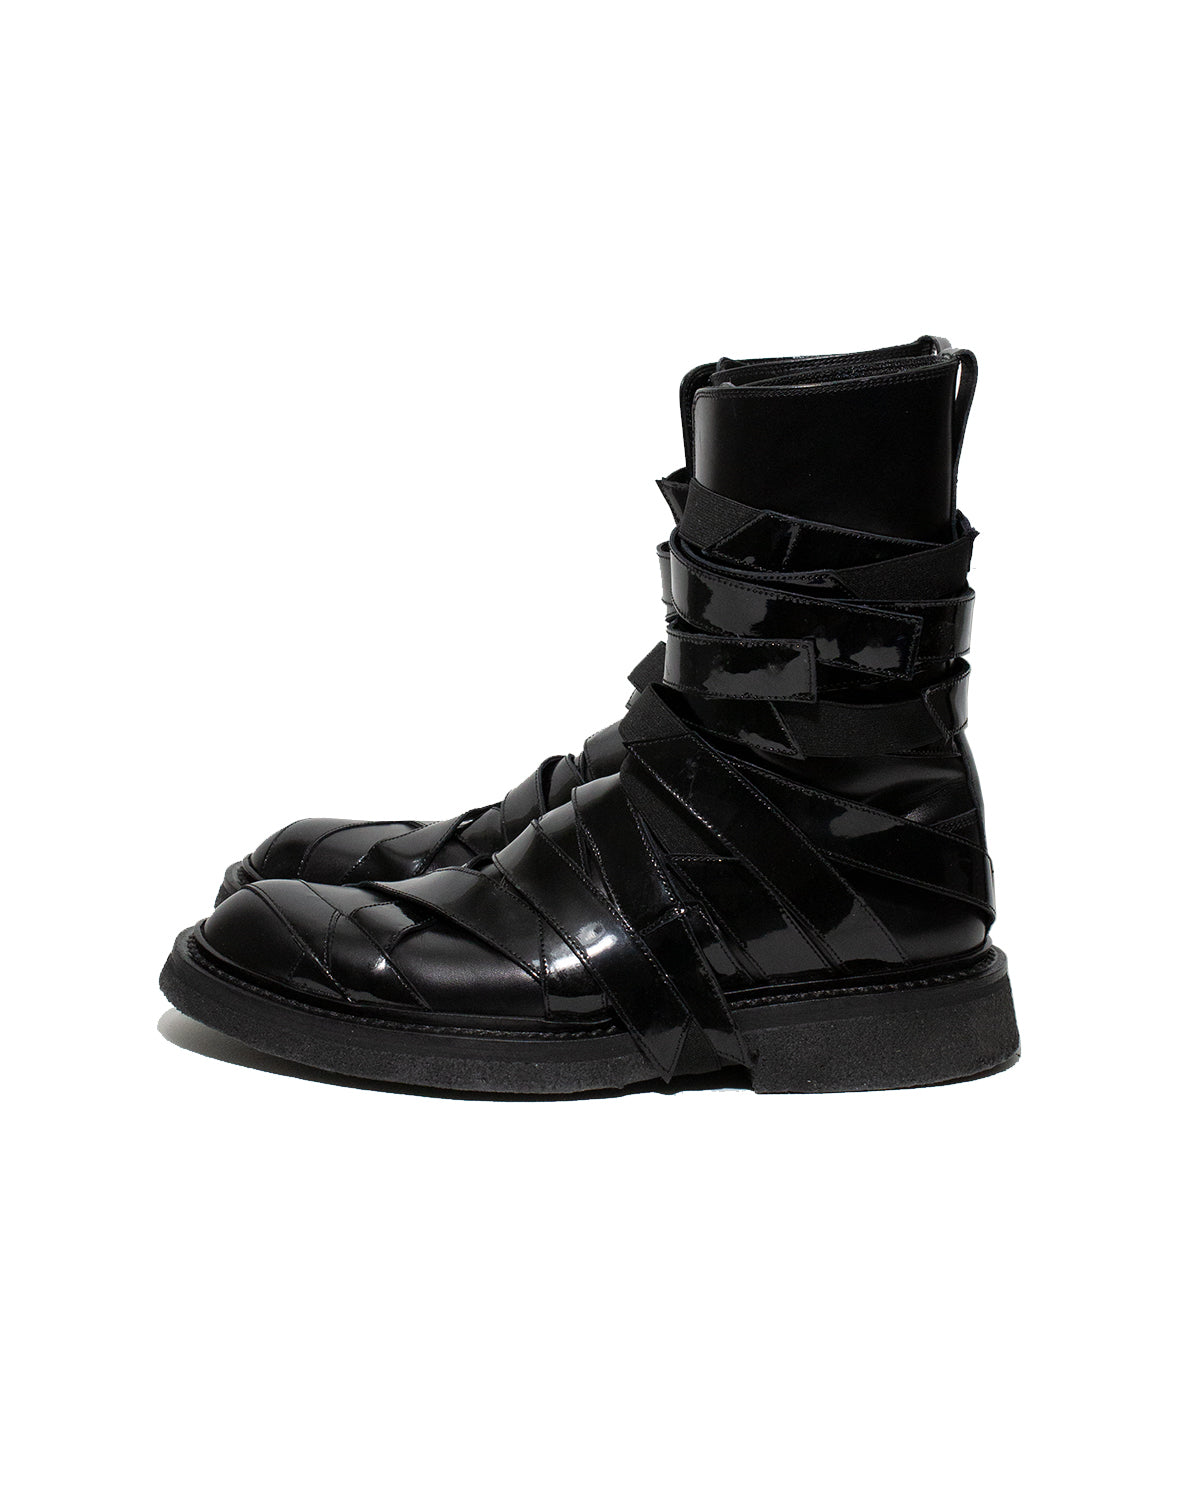 Dior Men's Authenticated Leather Boots